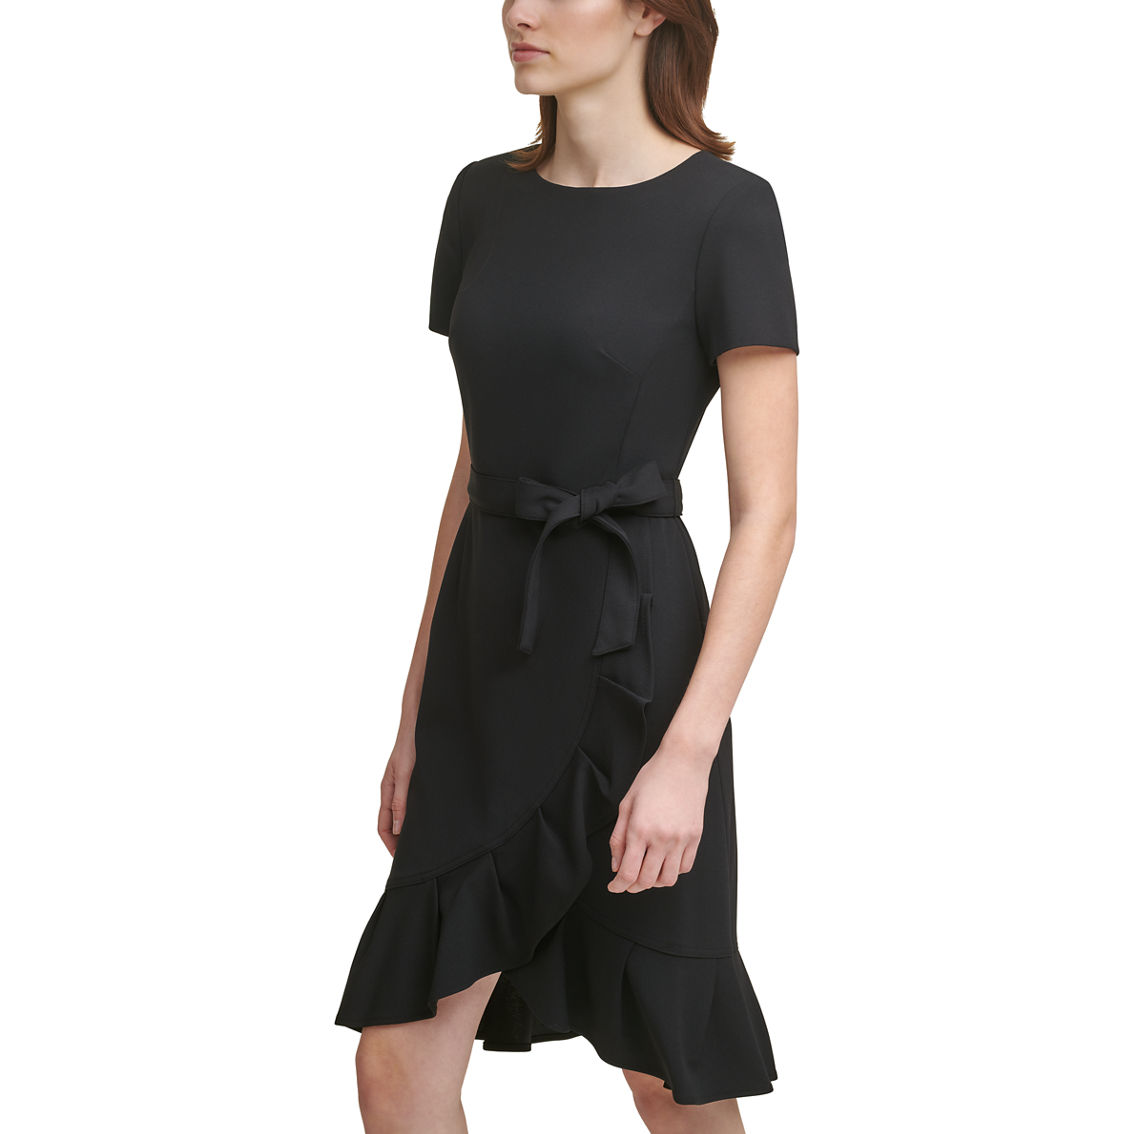 Calvin Klein Short Sleeve Tie Front Ruffle Hem Fit and Flare Dress - Image 3 of 3